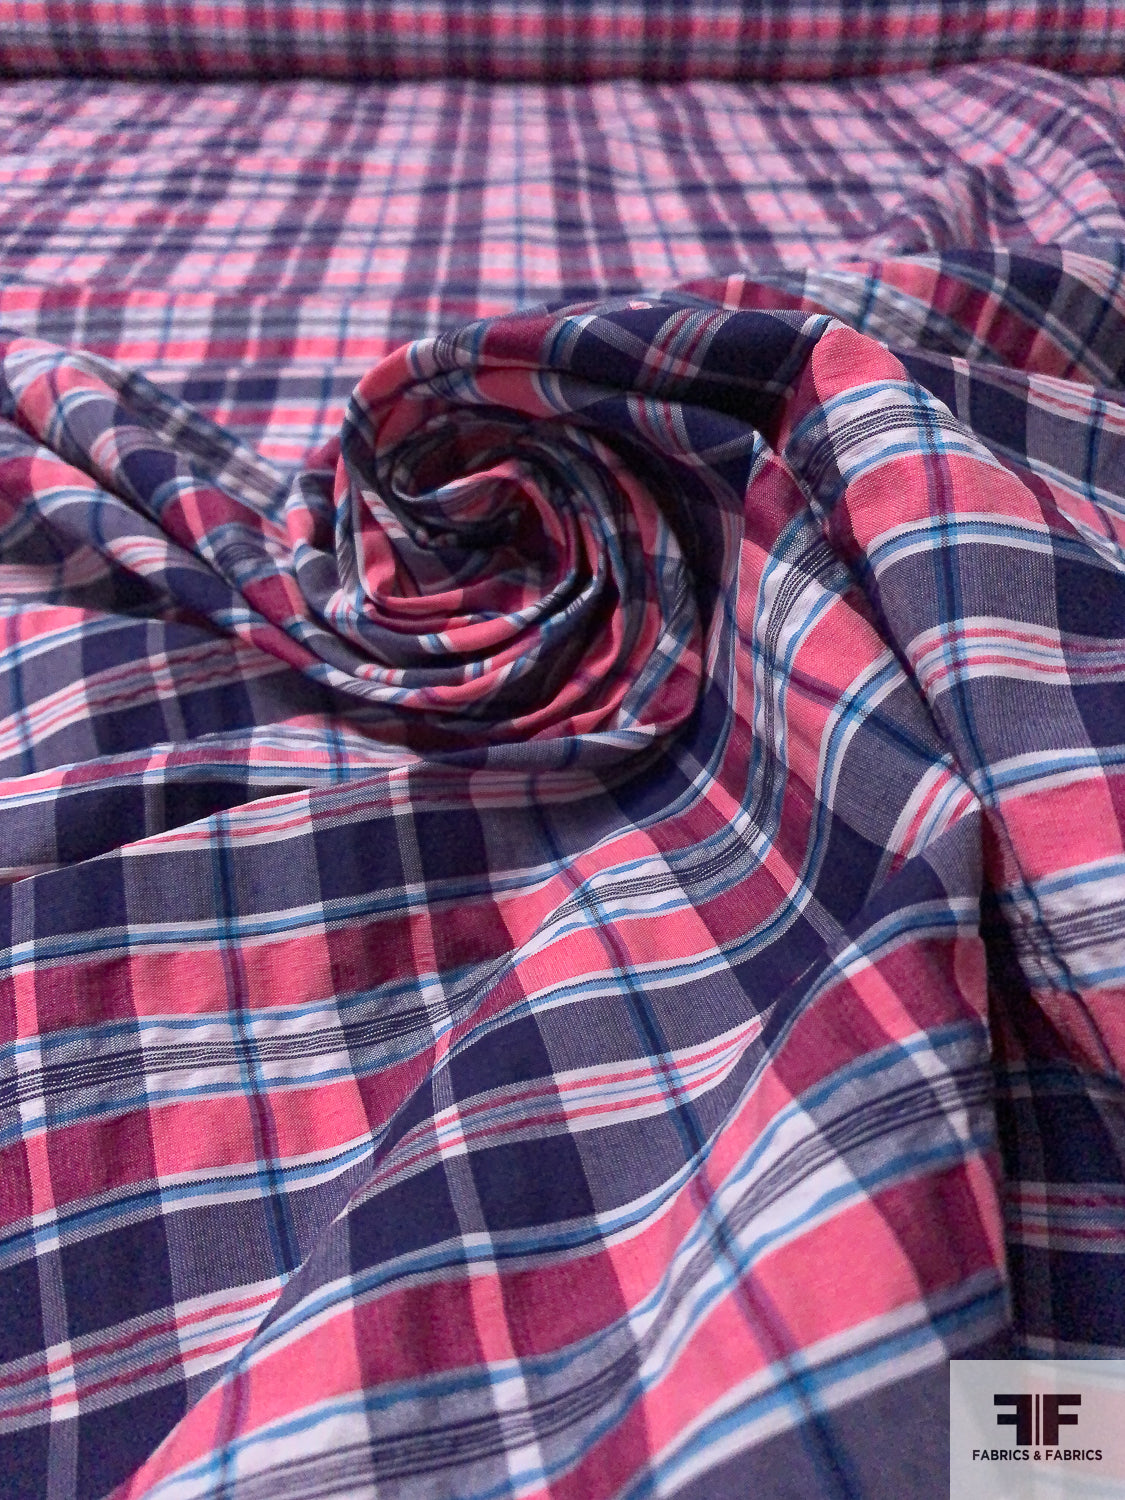 Plaid Textured Stretch Cotton Blend Shirting - Navy / Punch Pink / Blue / White